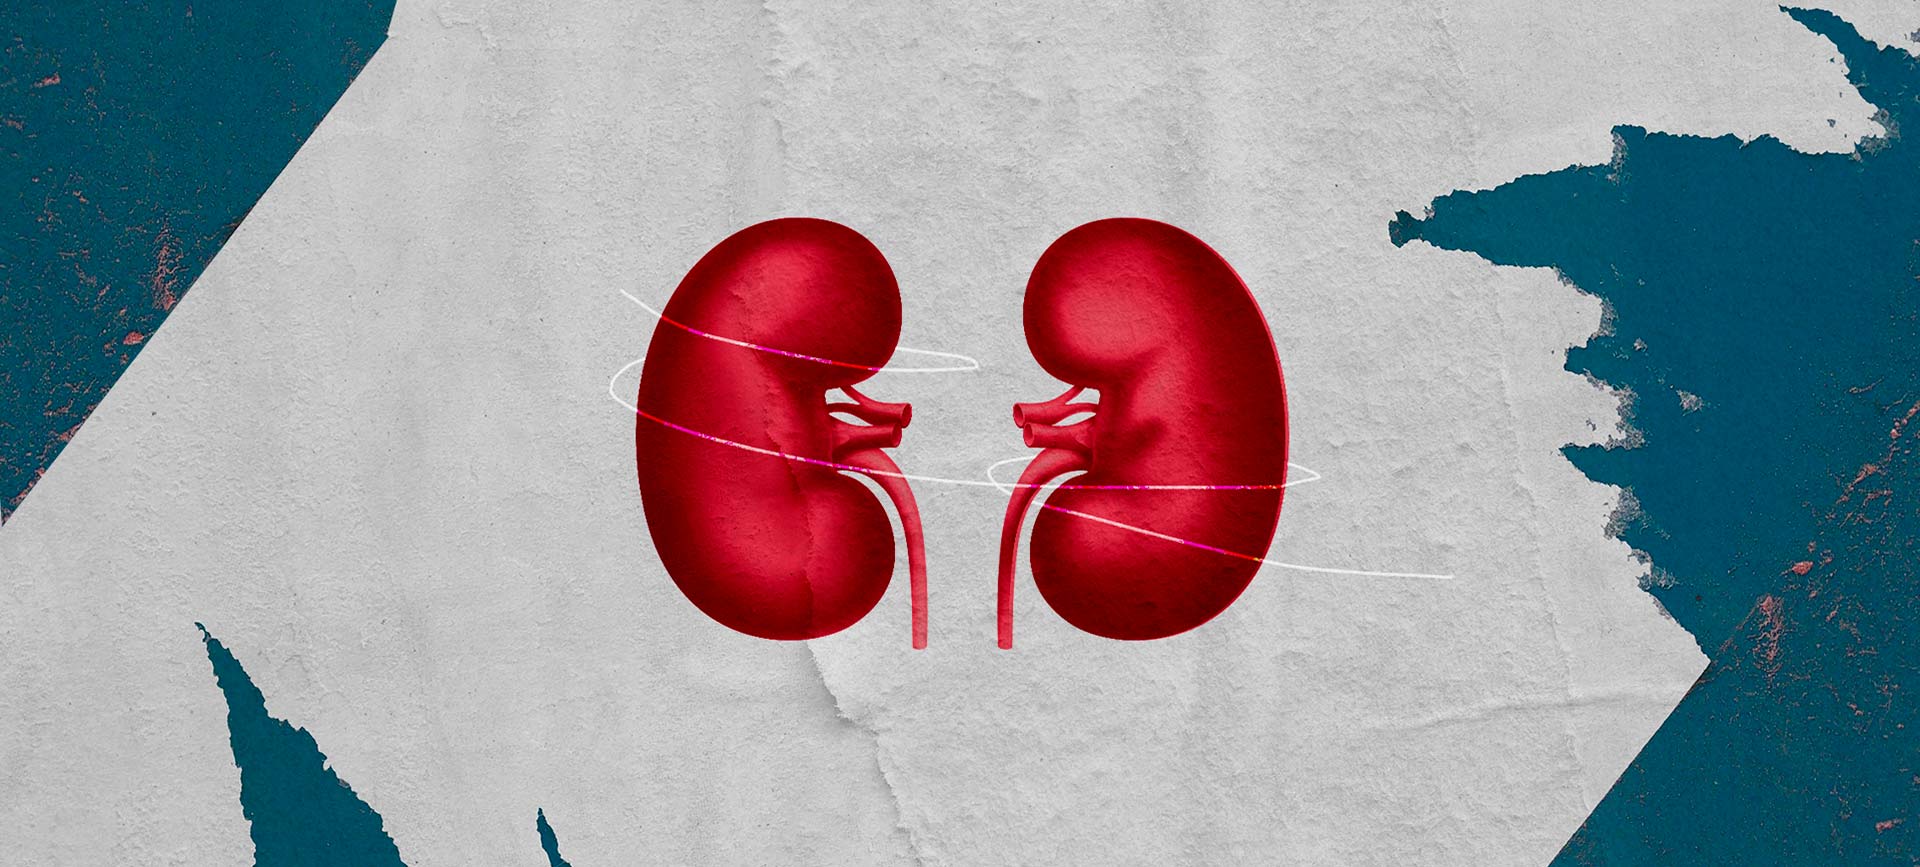 A red kidney is mirrored against a grey and dark green background.